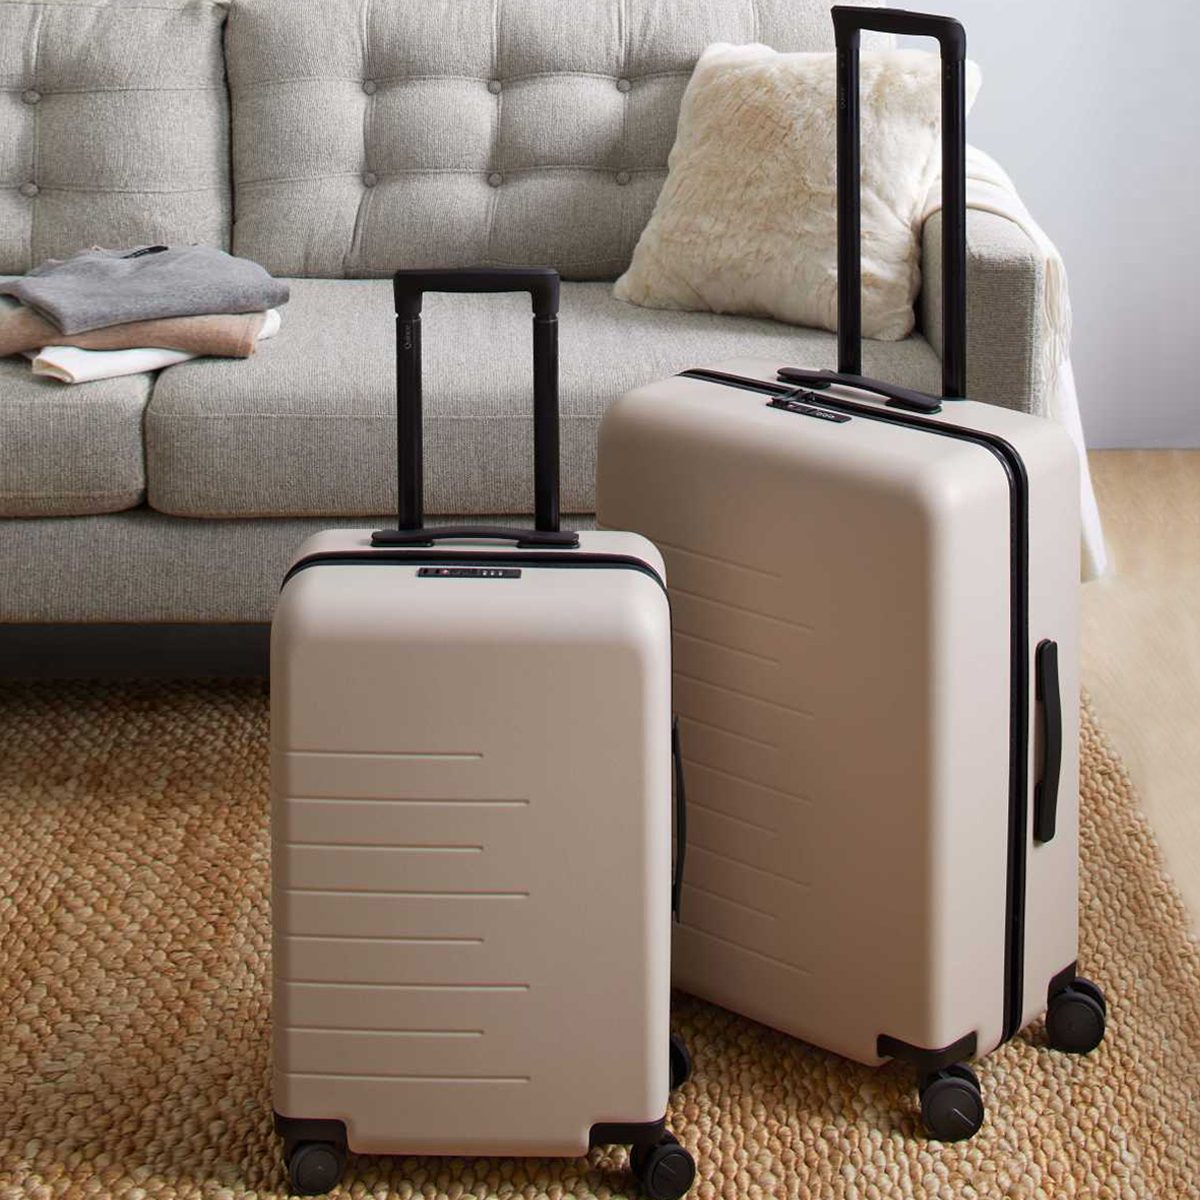 Quince Hard Shell Suitcase Review: Is It Worth The Price?, 50% OFF